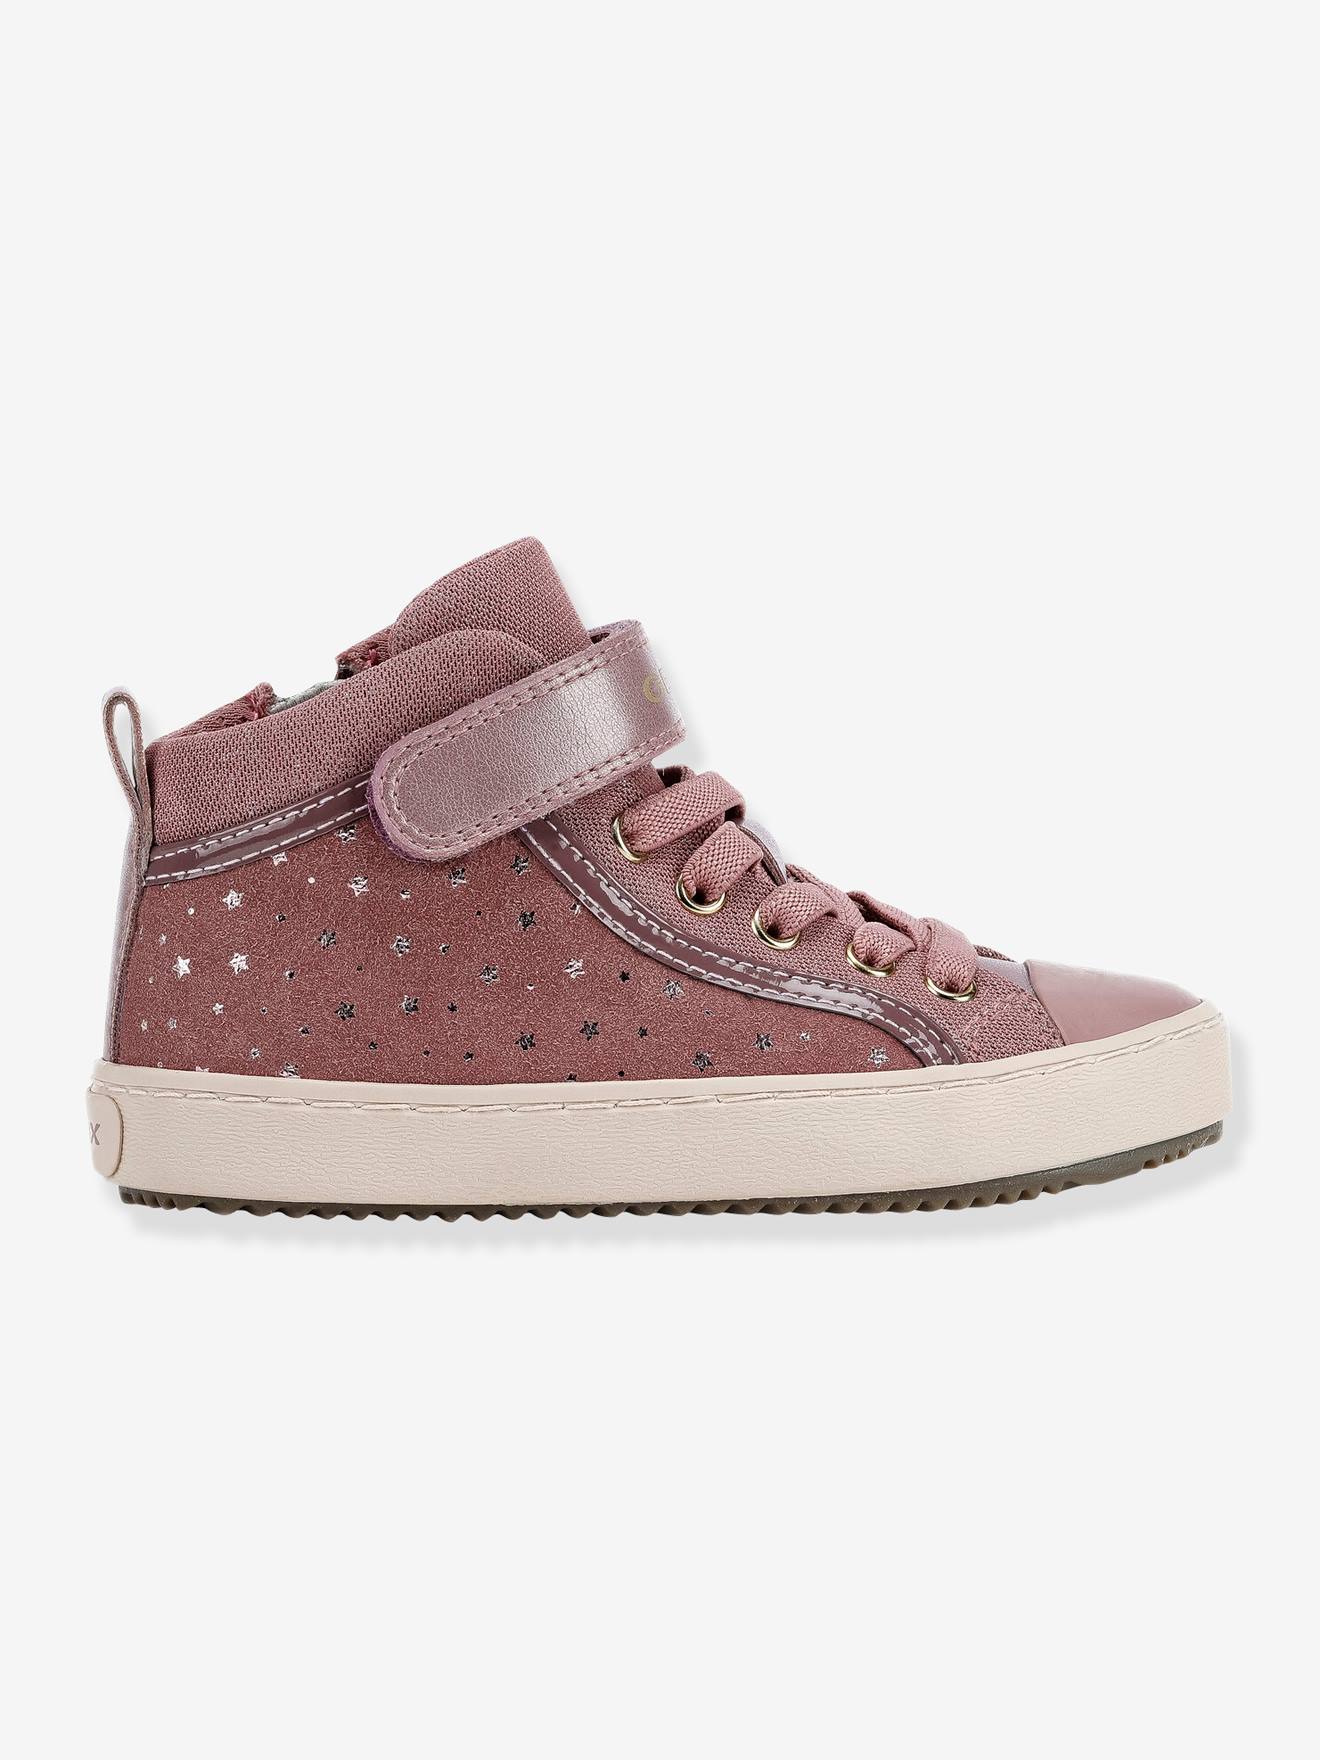 Kalispera Girl I High Top Trainers For Girls By Geox Pink Medium Solid With Desig Shoes